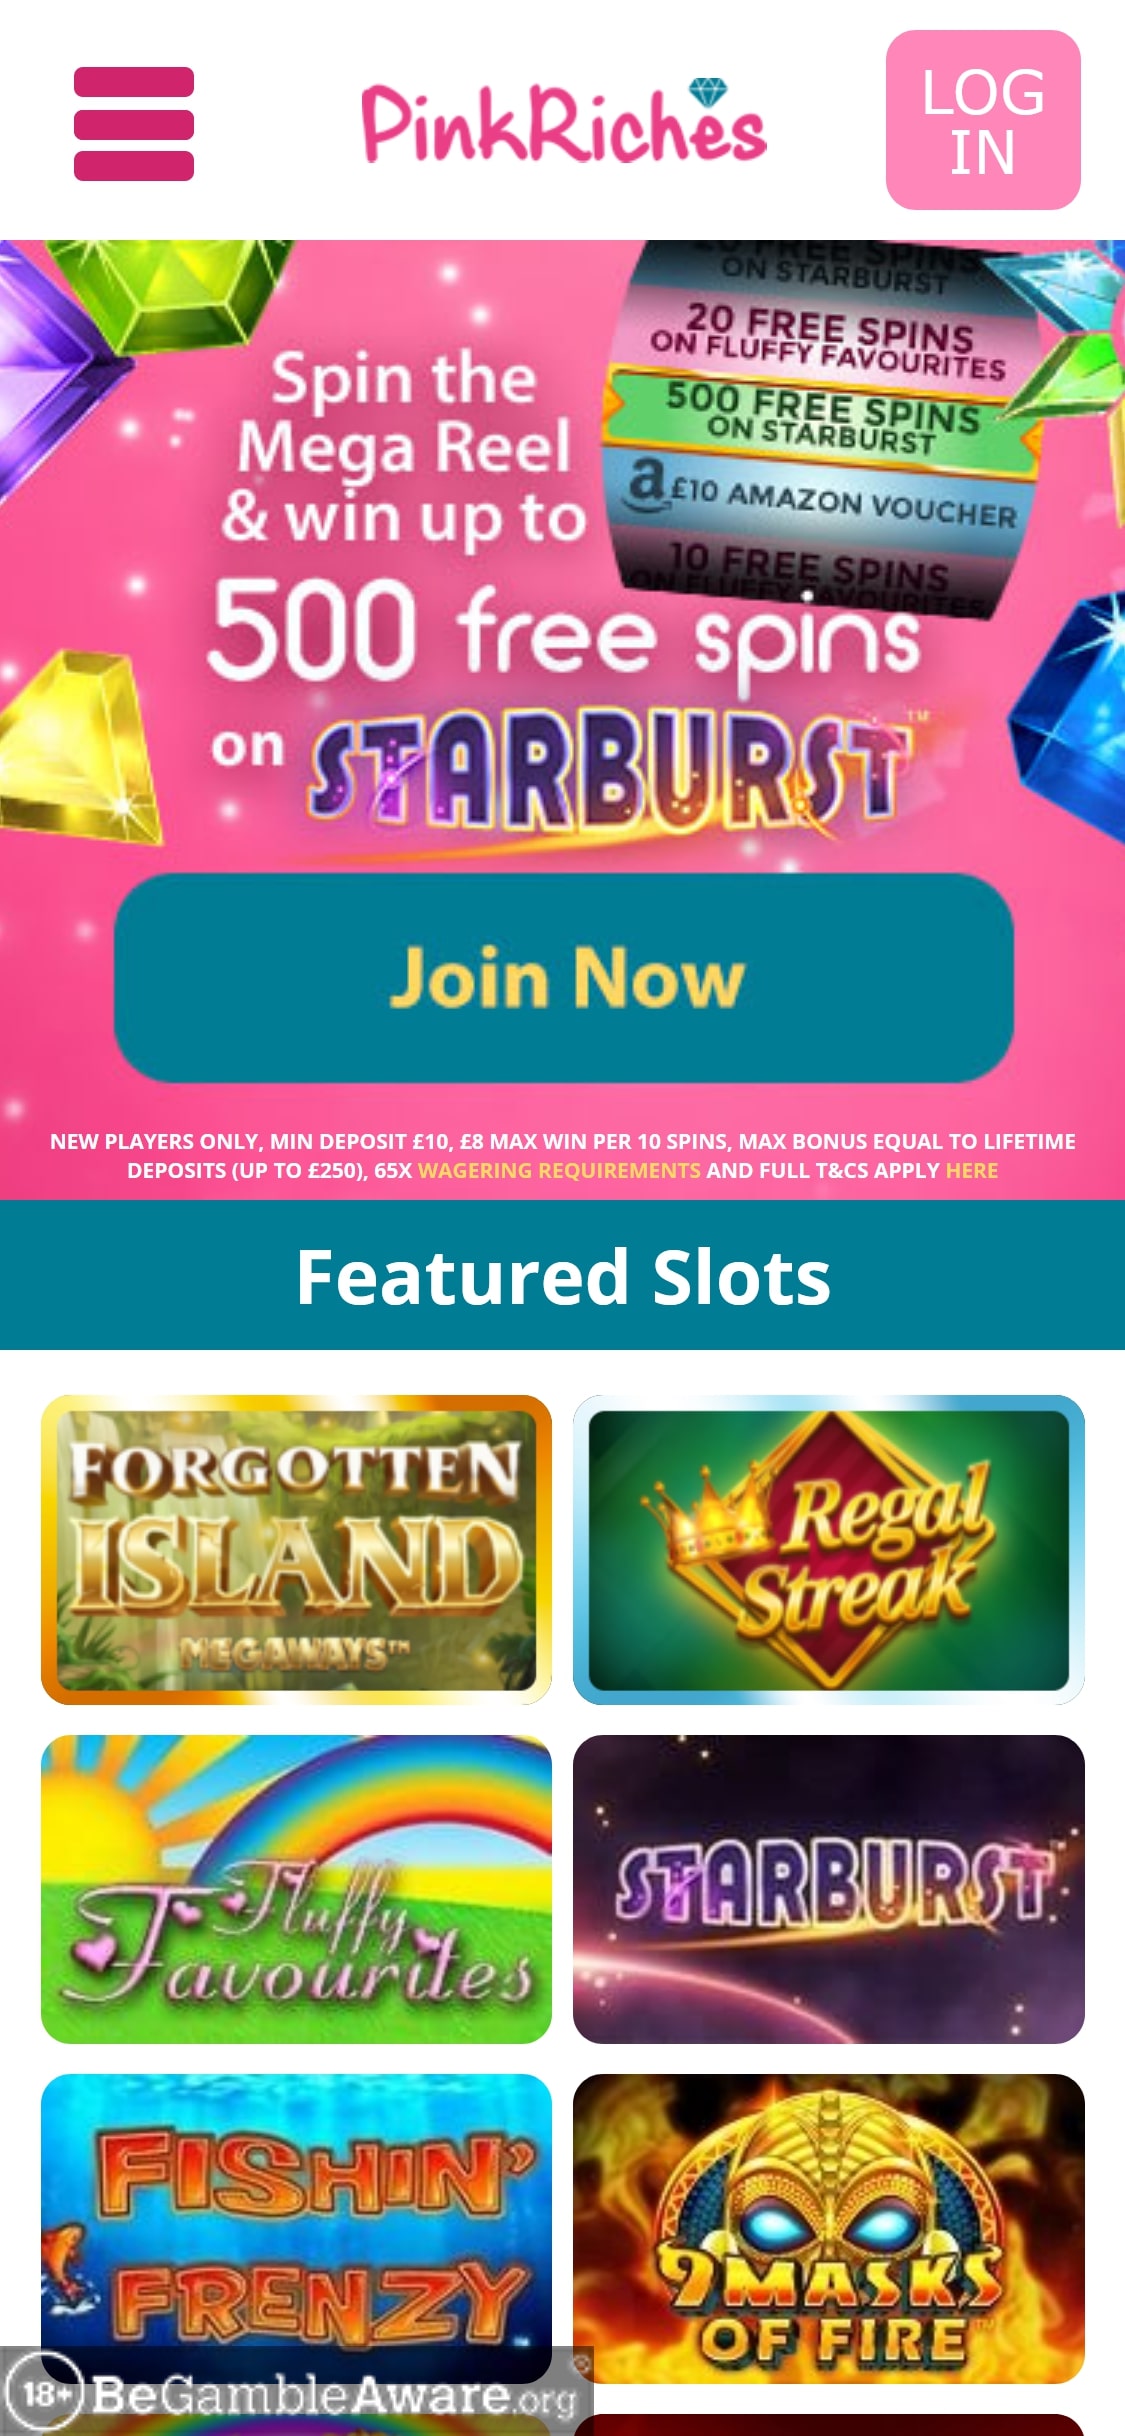 Pink Riches Casino Mobile Review